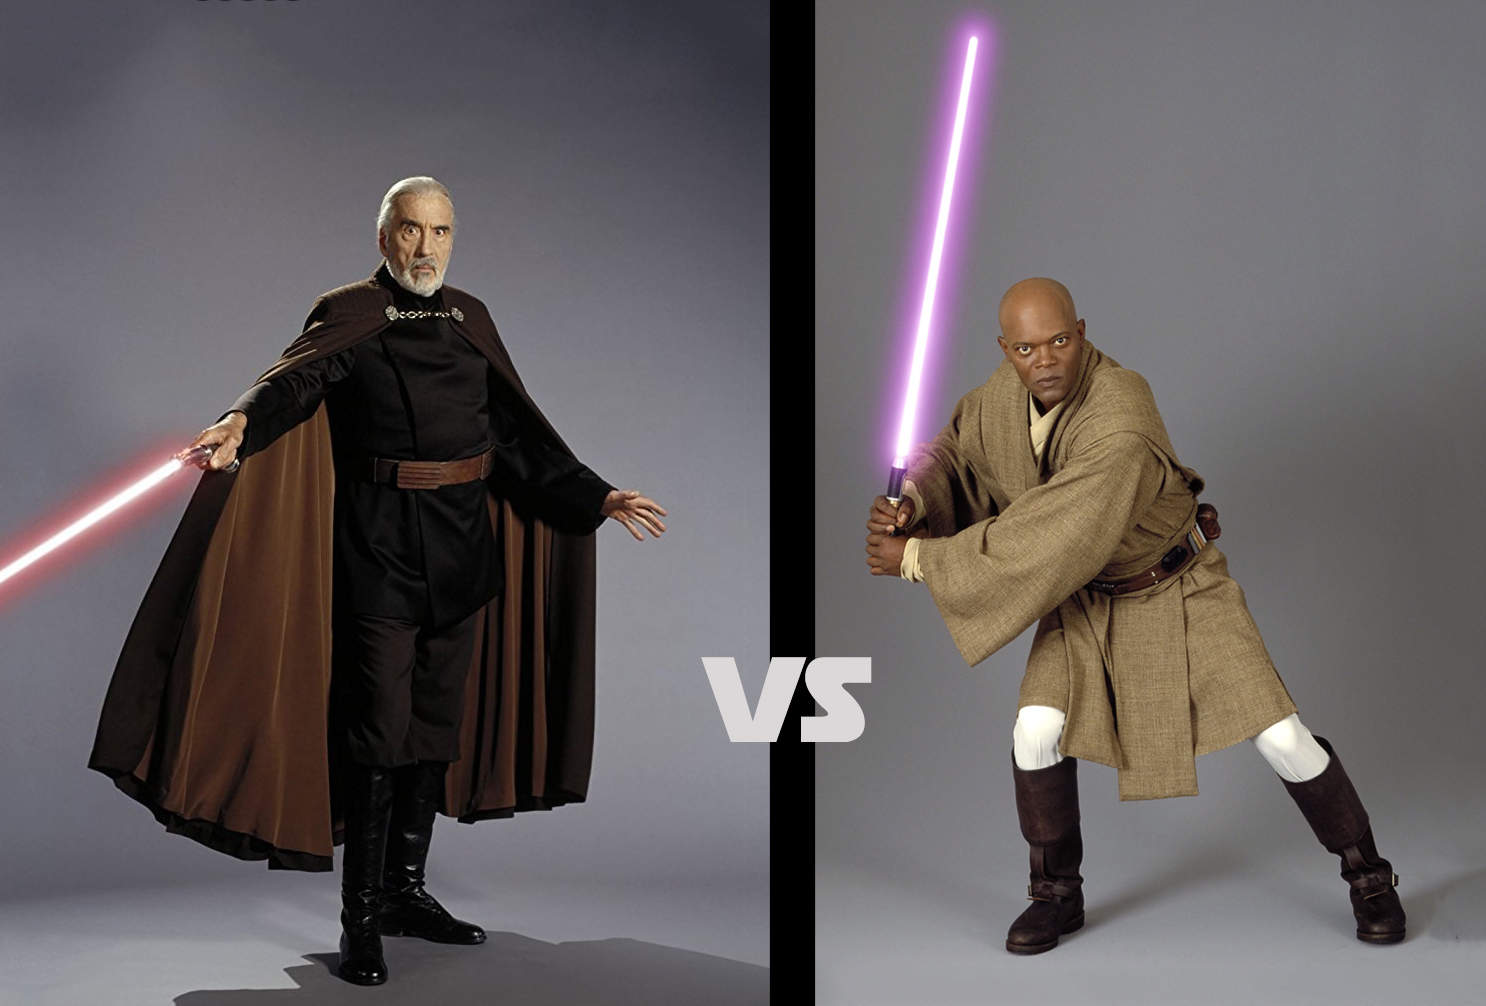 Poll: Who would win in a duel to the death between Count Dooku and Mace Windu?